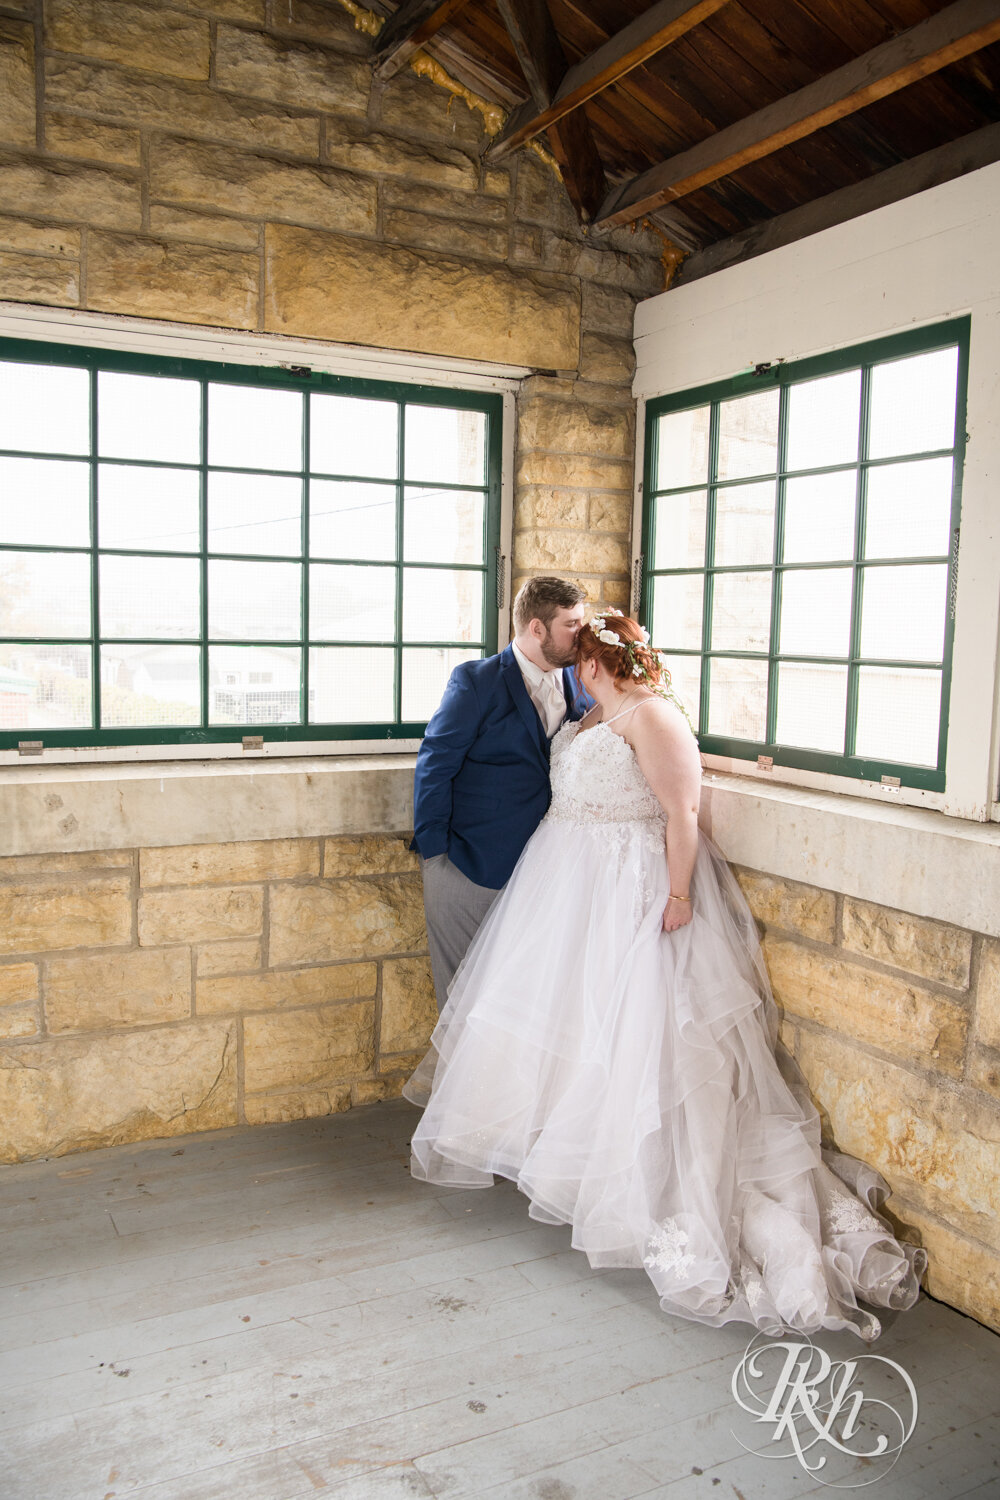 Plus size bride and groom kiss at wedding at Olmsted County Fairgrounds in Rochester, Minnesota.